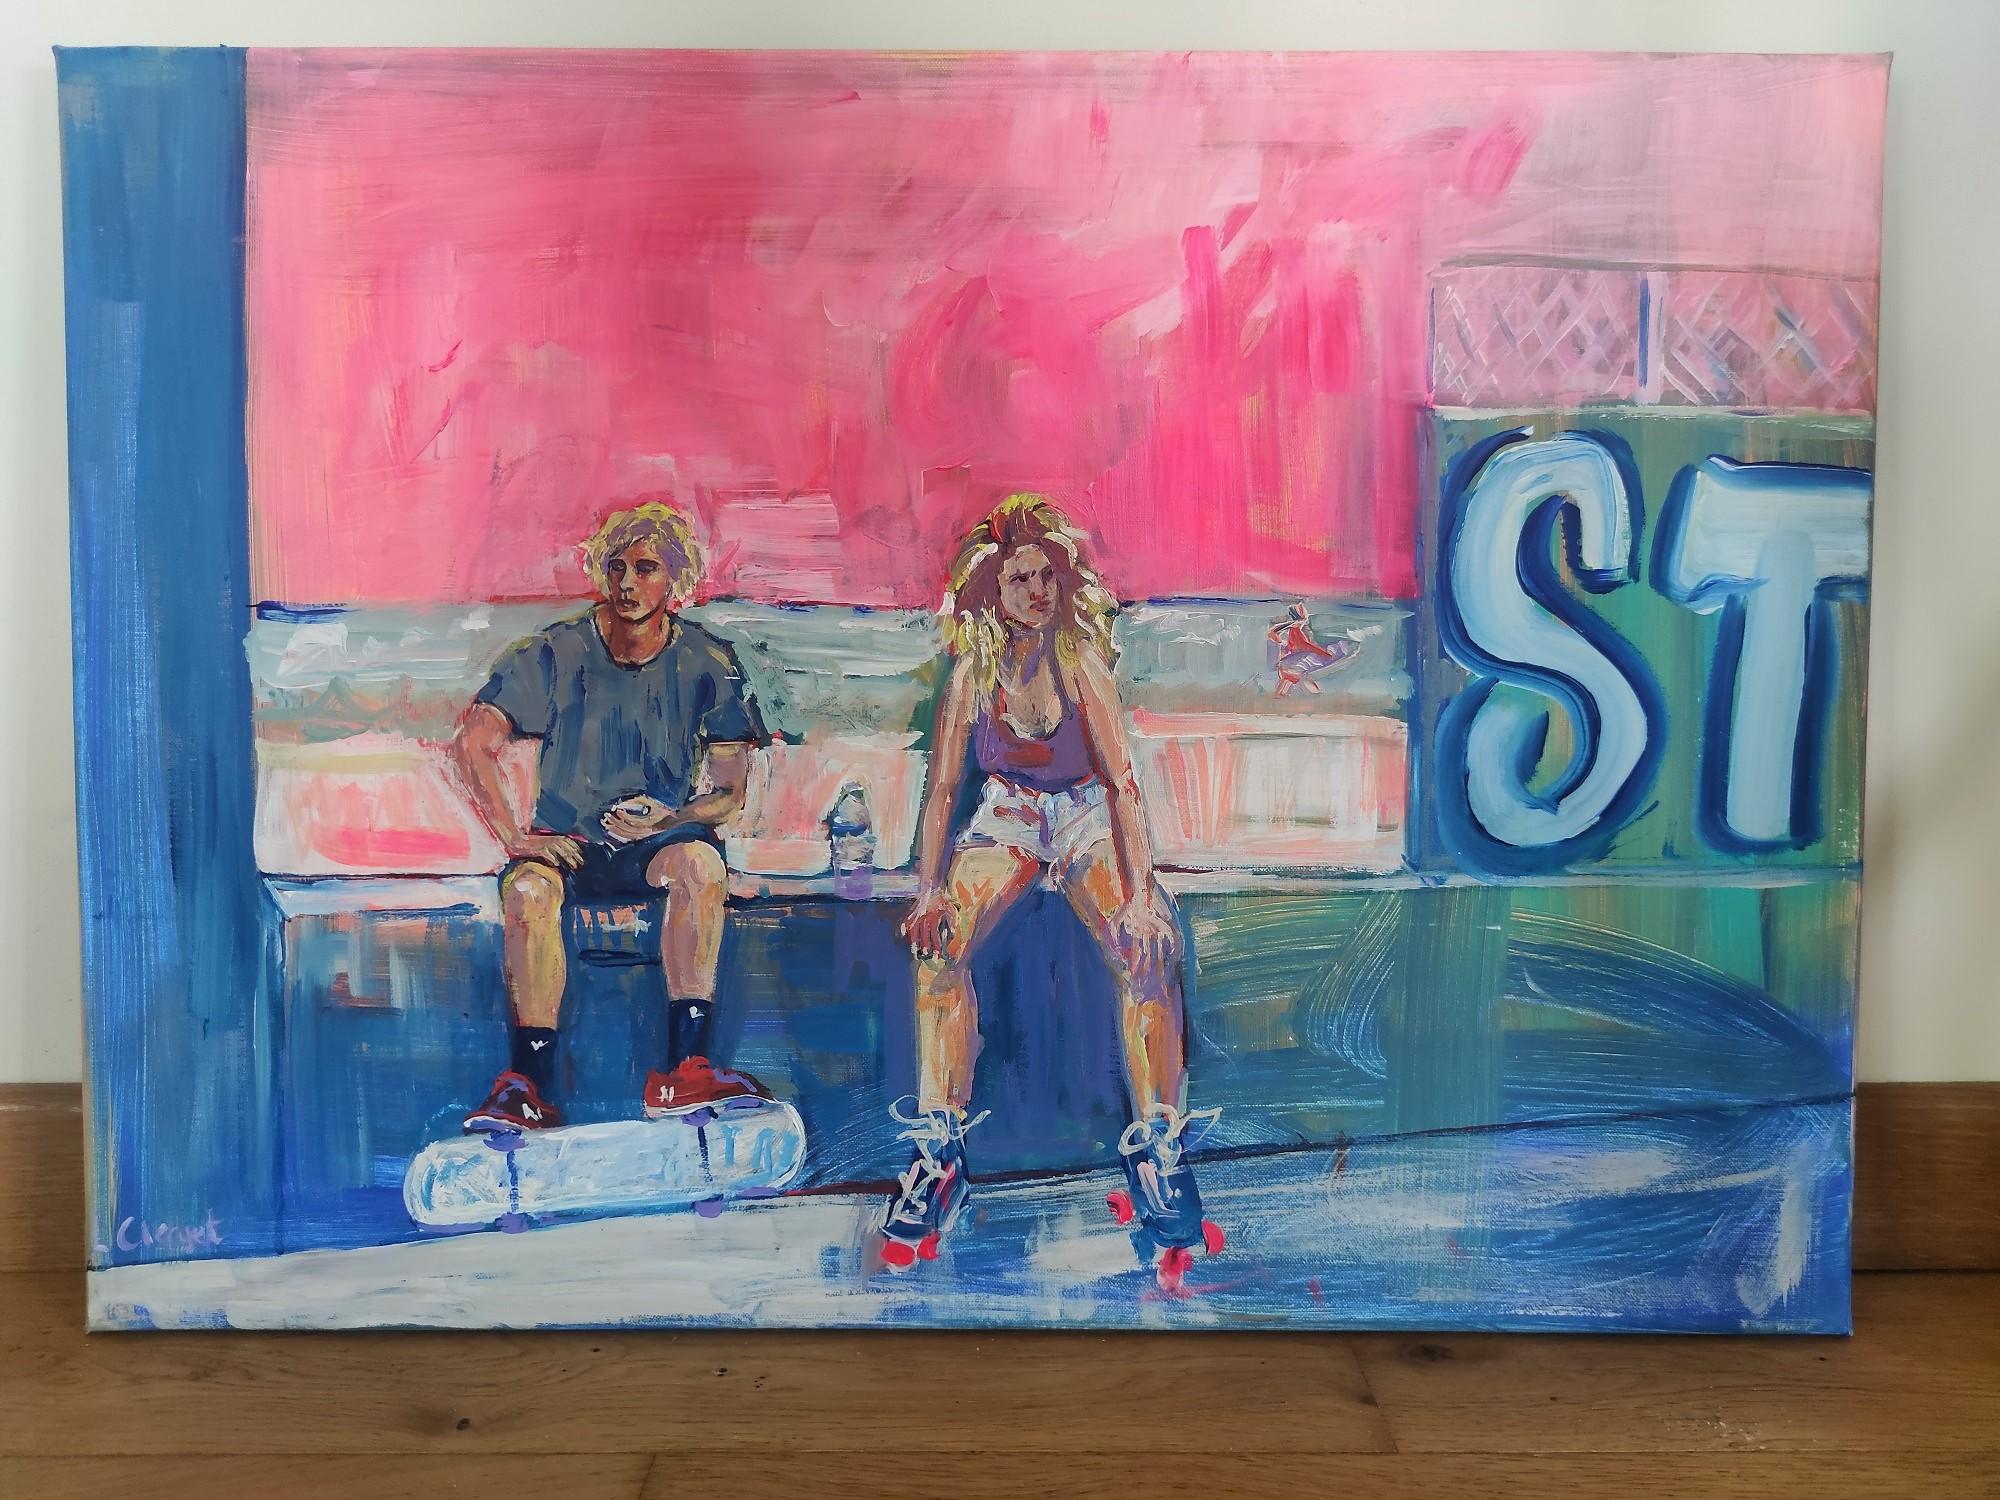 
This painting is from the serie 'Rollers & Skate